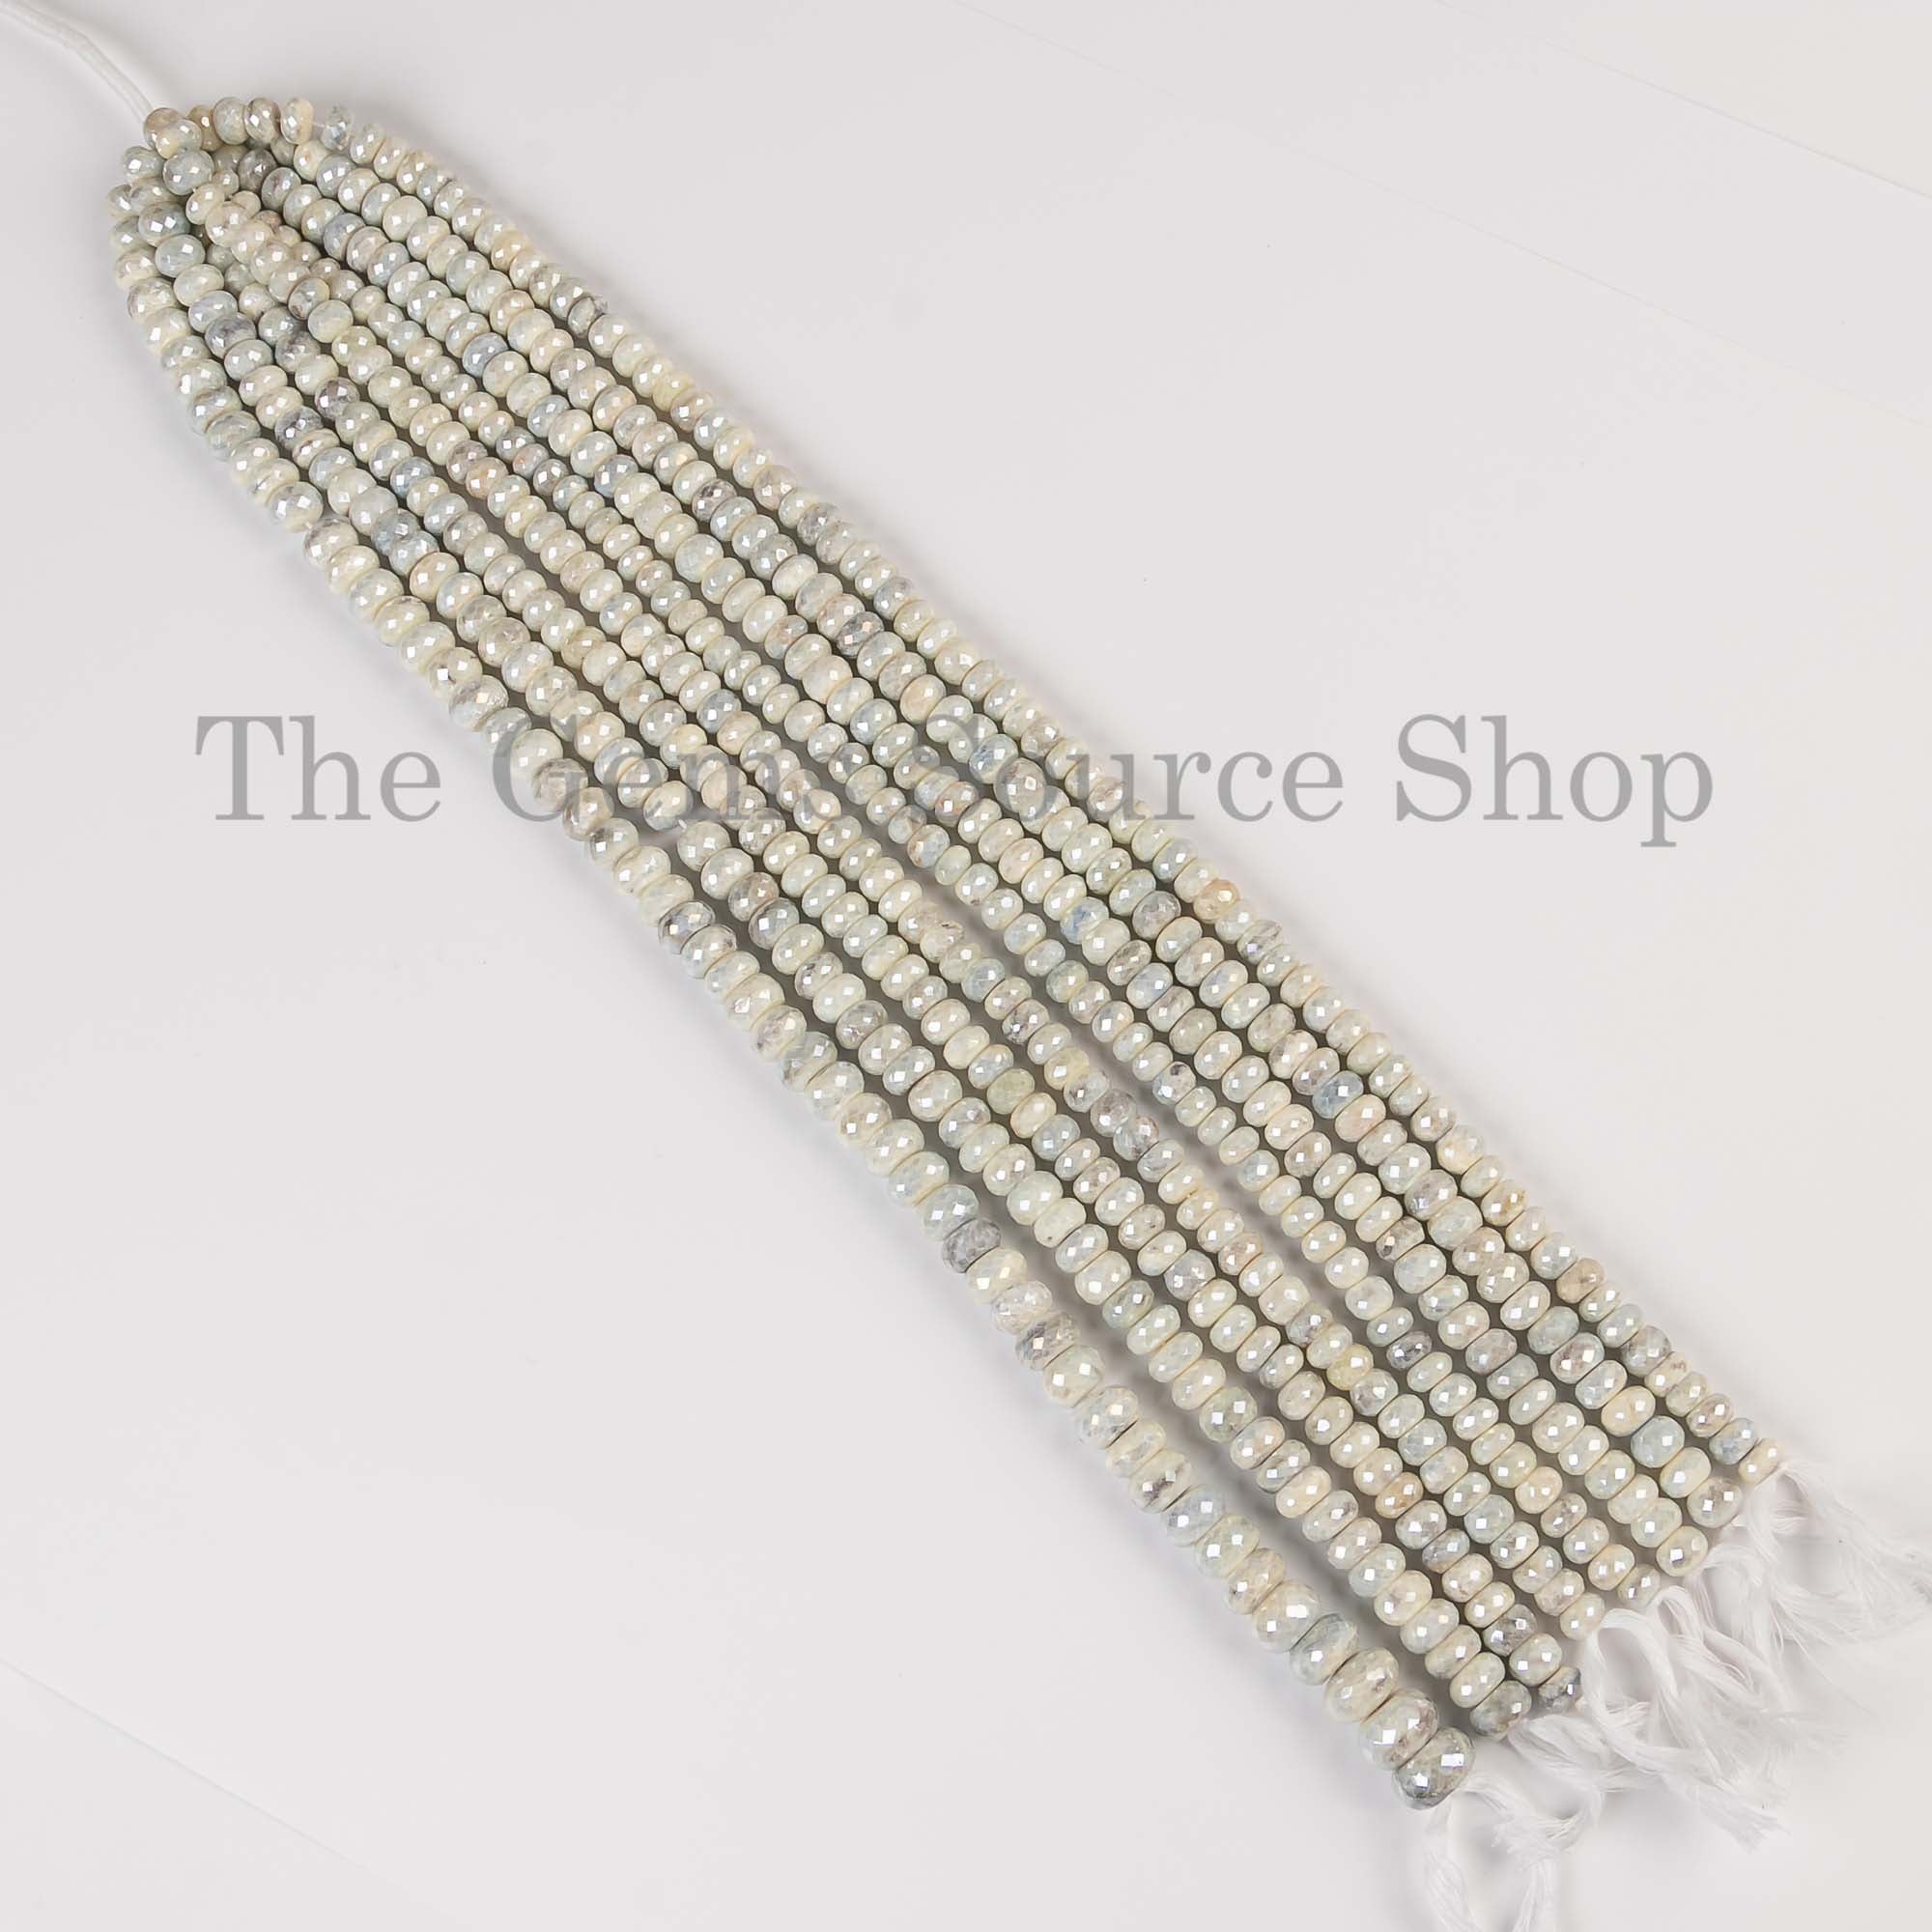 Sapphire Silverite Coated Faceted Rondelle, Coated Sapphire Beads, Sapphire Coated Faceted Beads